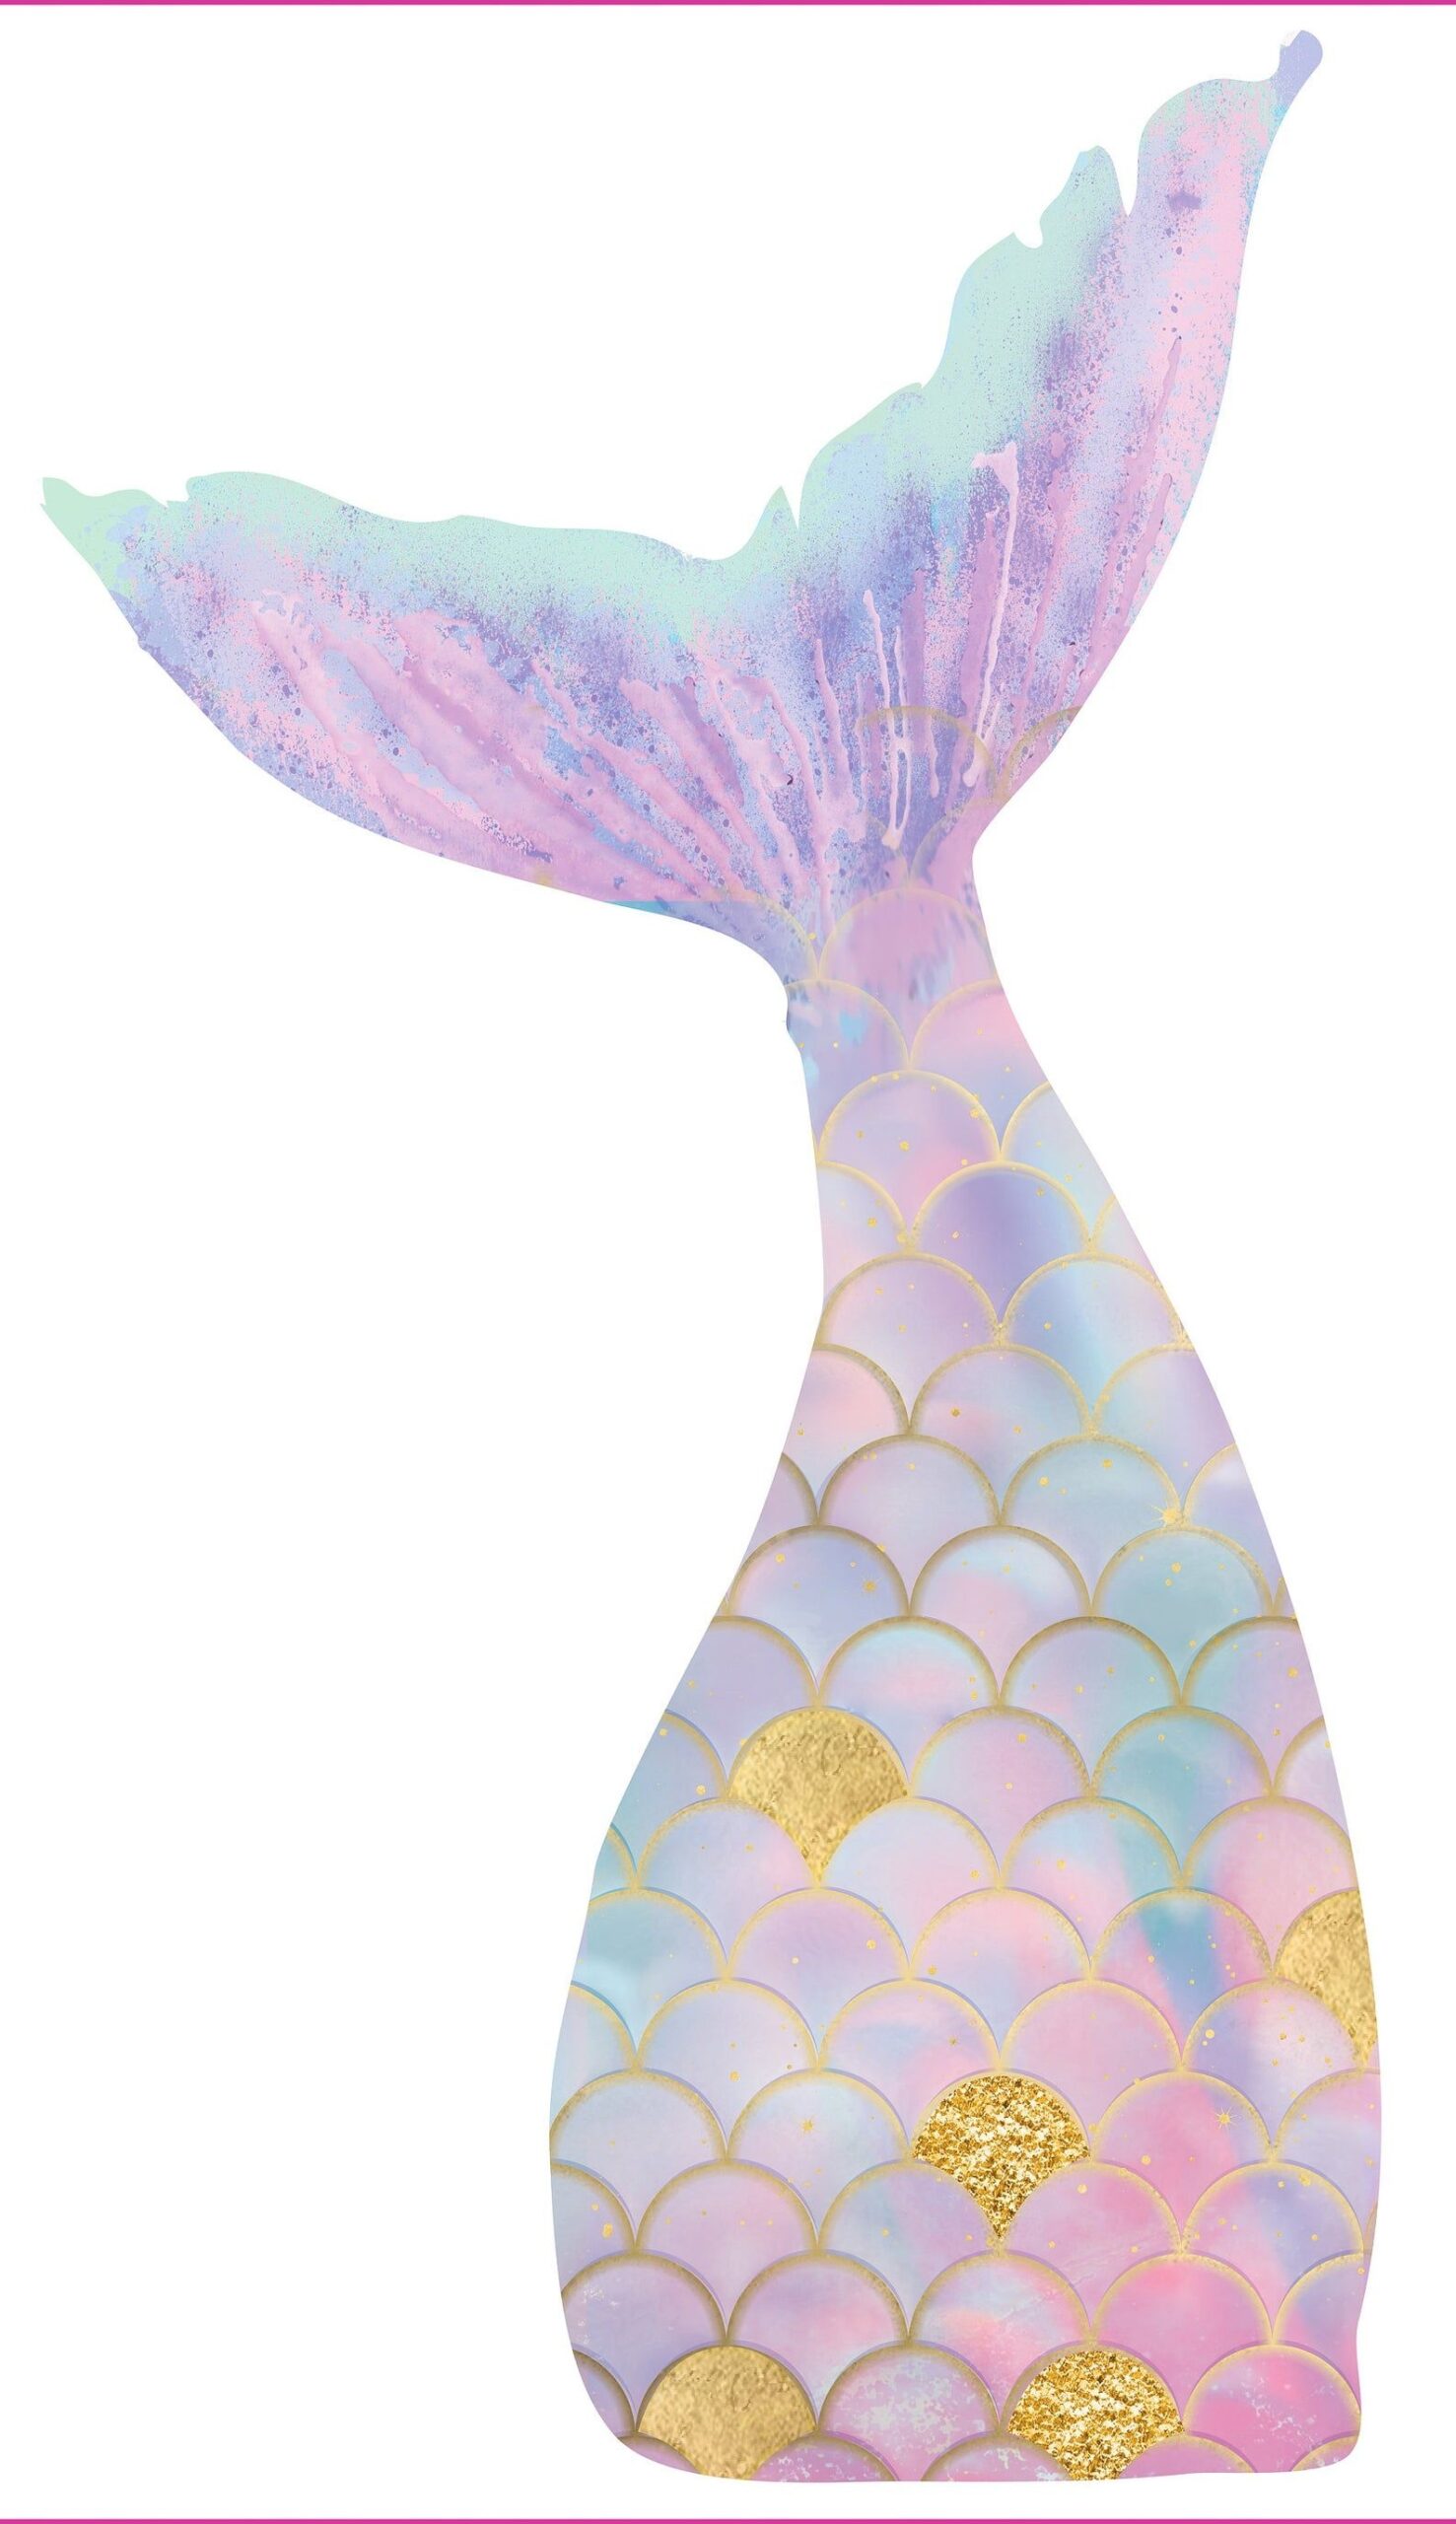 Large Mermaid Tail Party Decoration PRINTABLE Mermaid Cutout Mermaid Tail Cardboard Cut Out Mermaid Standee Party Prop Instant Pool Party Etsy Large Mermaid Mermaid Birthday Cakes Mermaid Cake Topper